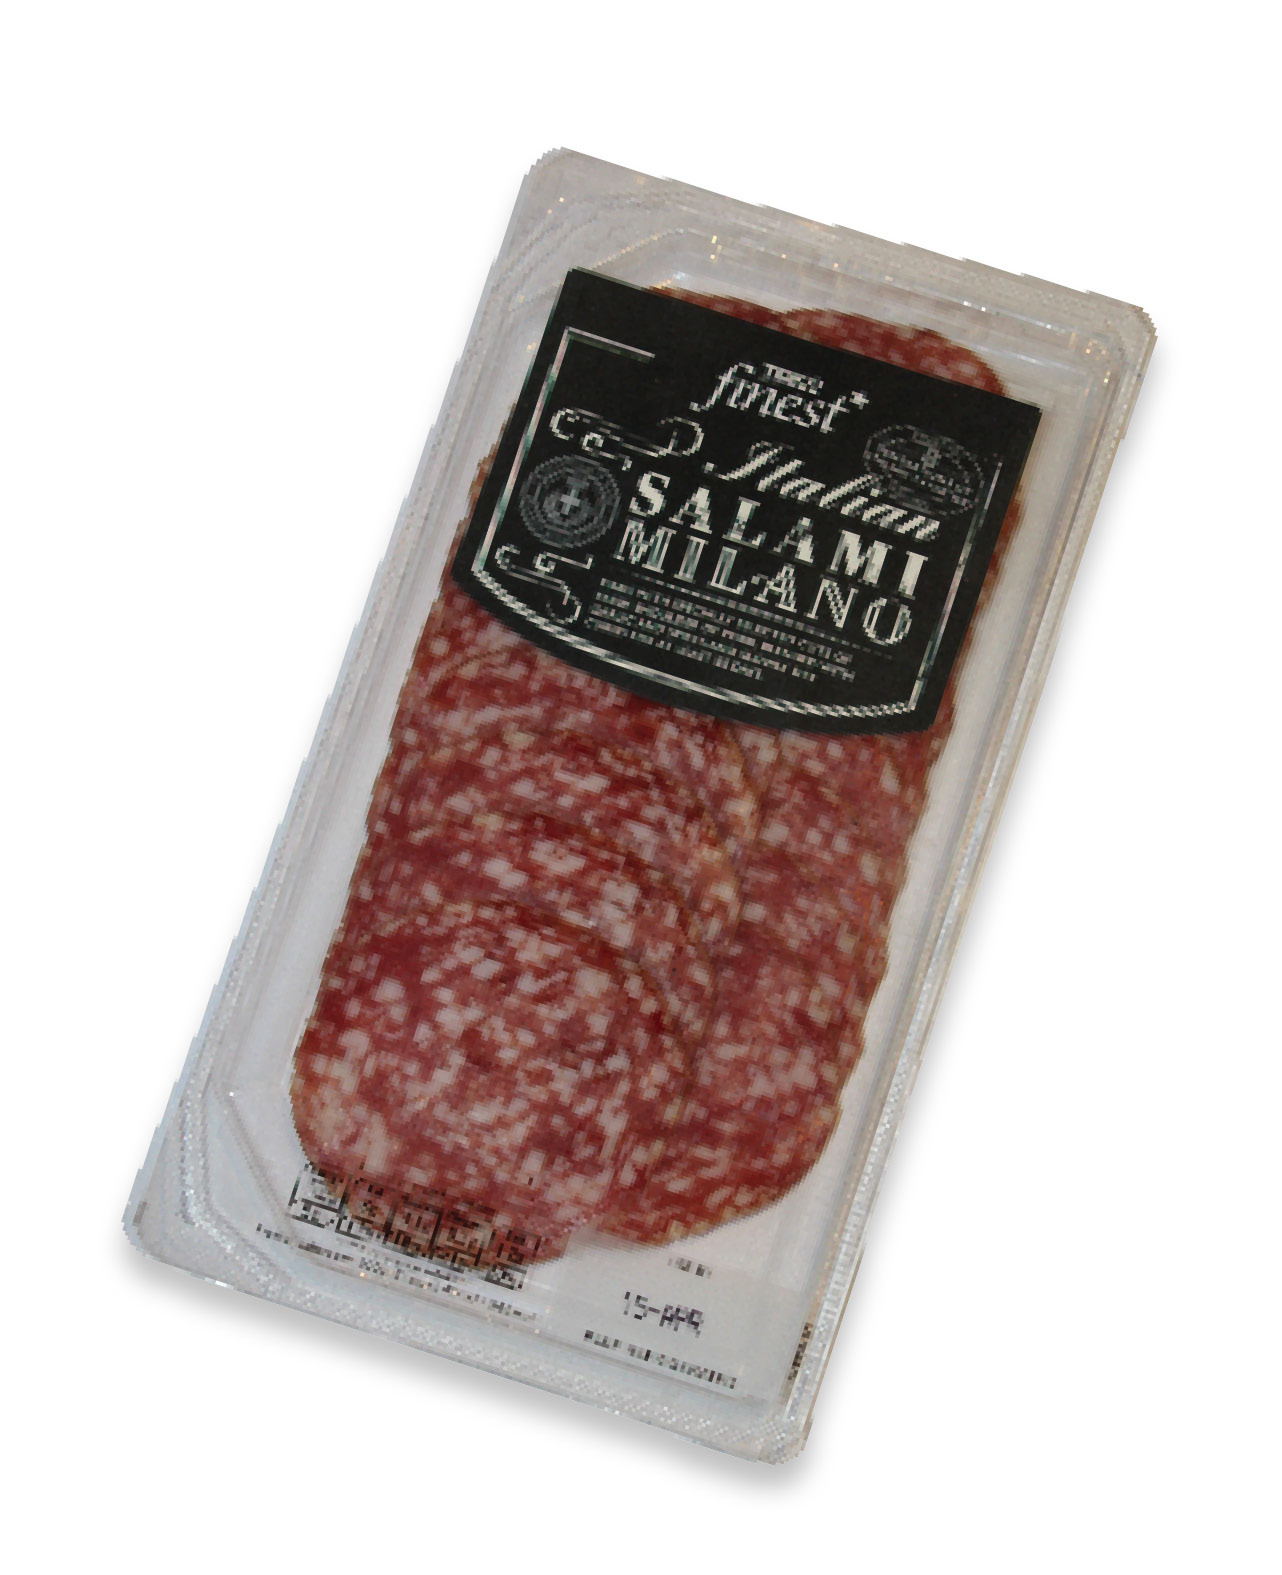 Top 6 Italian Salami Brands - Italy Travel and Life | Italy Travel and Life